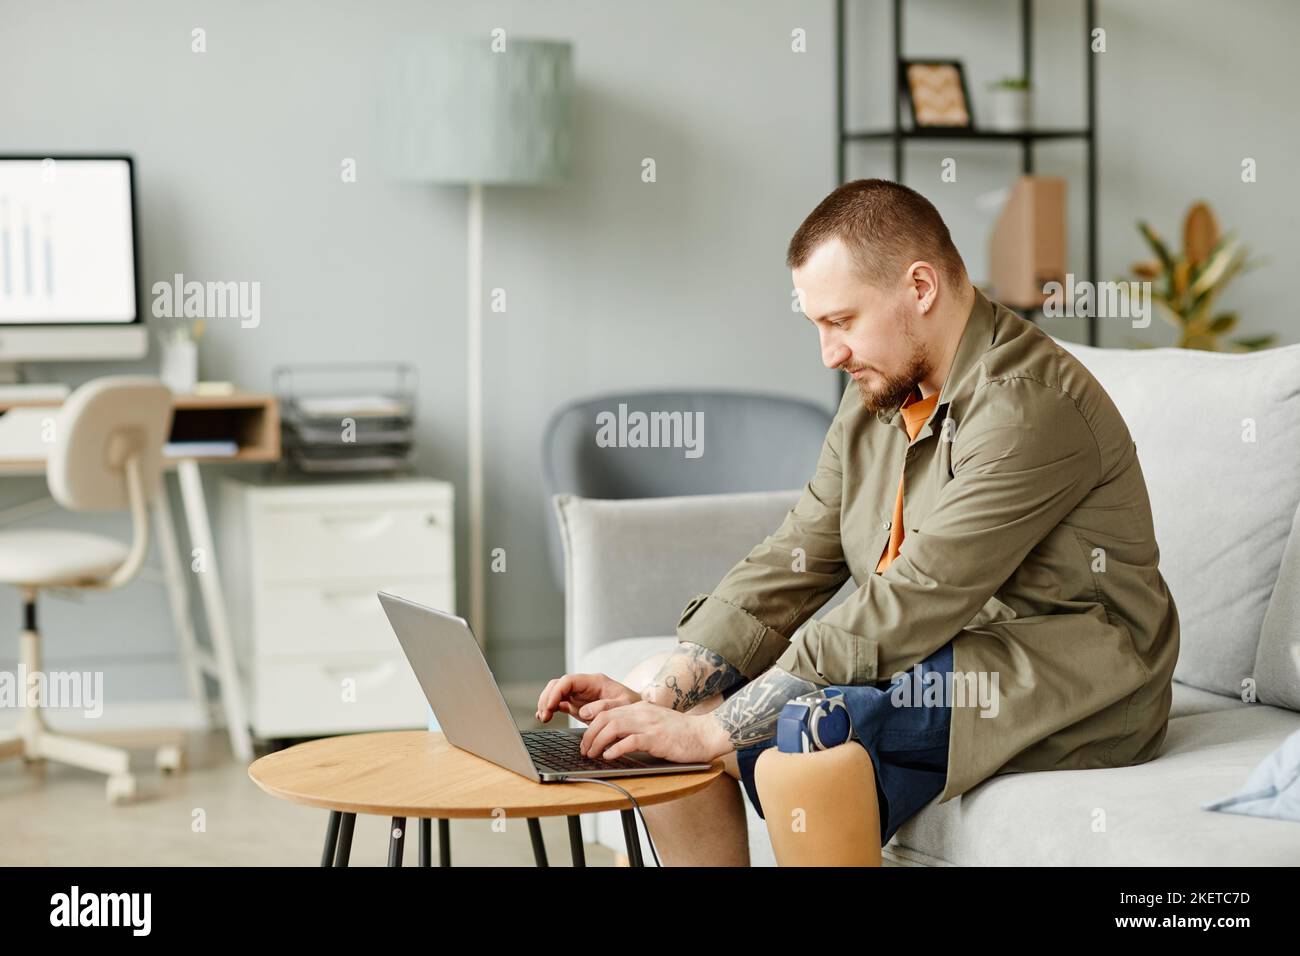 Side view portrait of man with prosthetic leg using laptop while working in minimal office interior, copy space Stock Photo